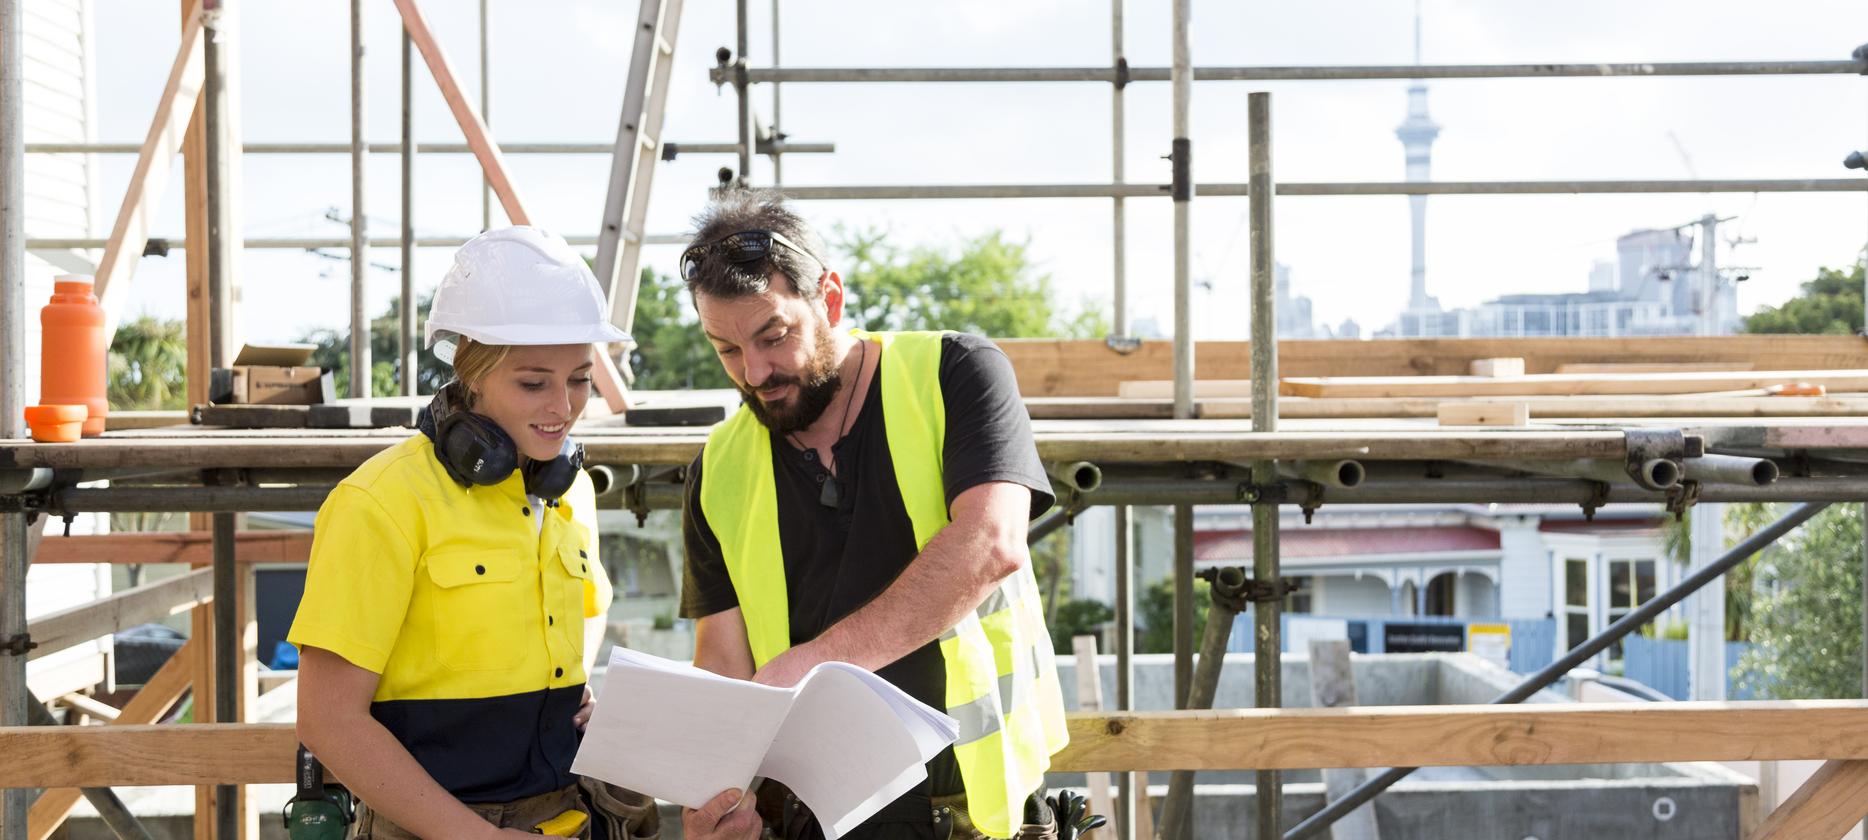 Record high dwelling consents add further strain to rising construction costs